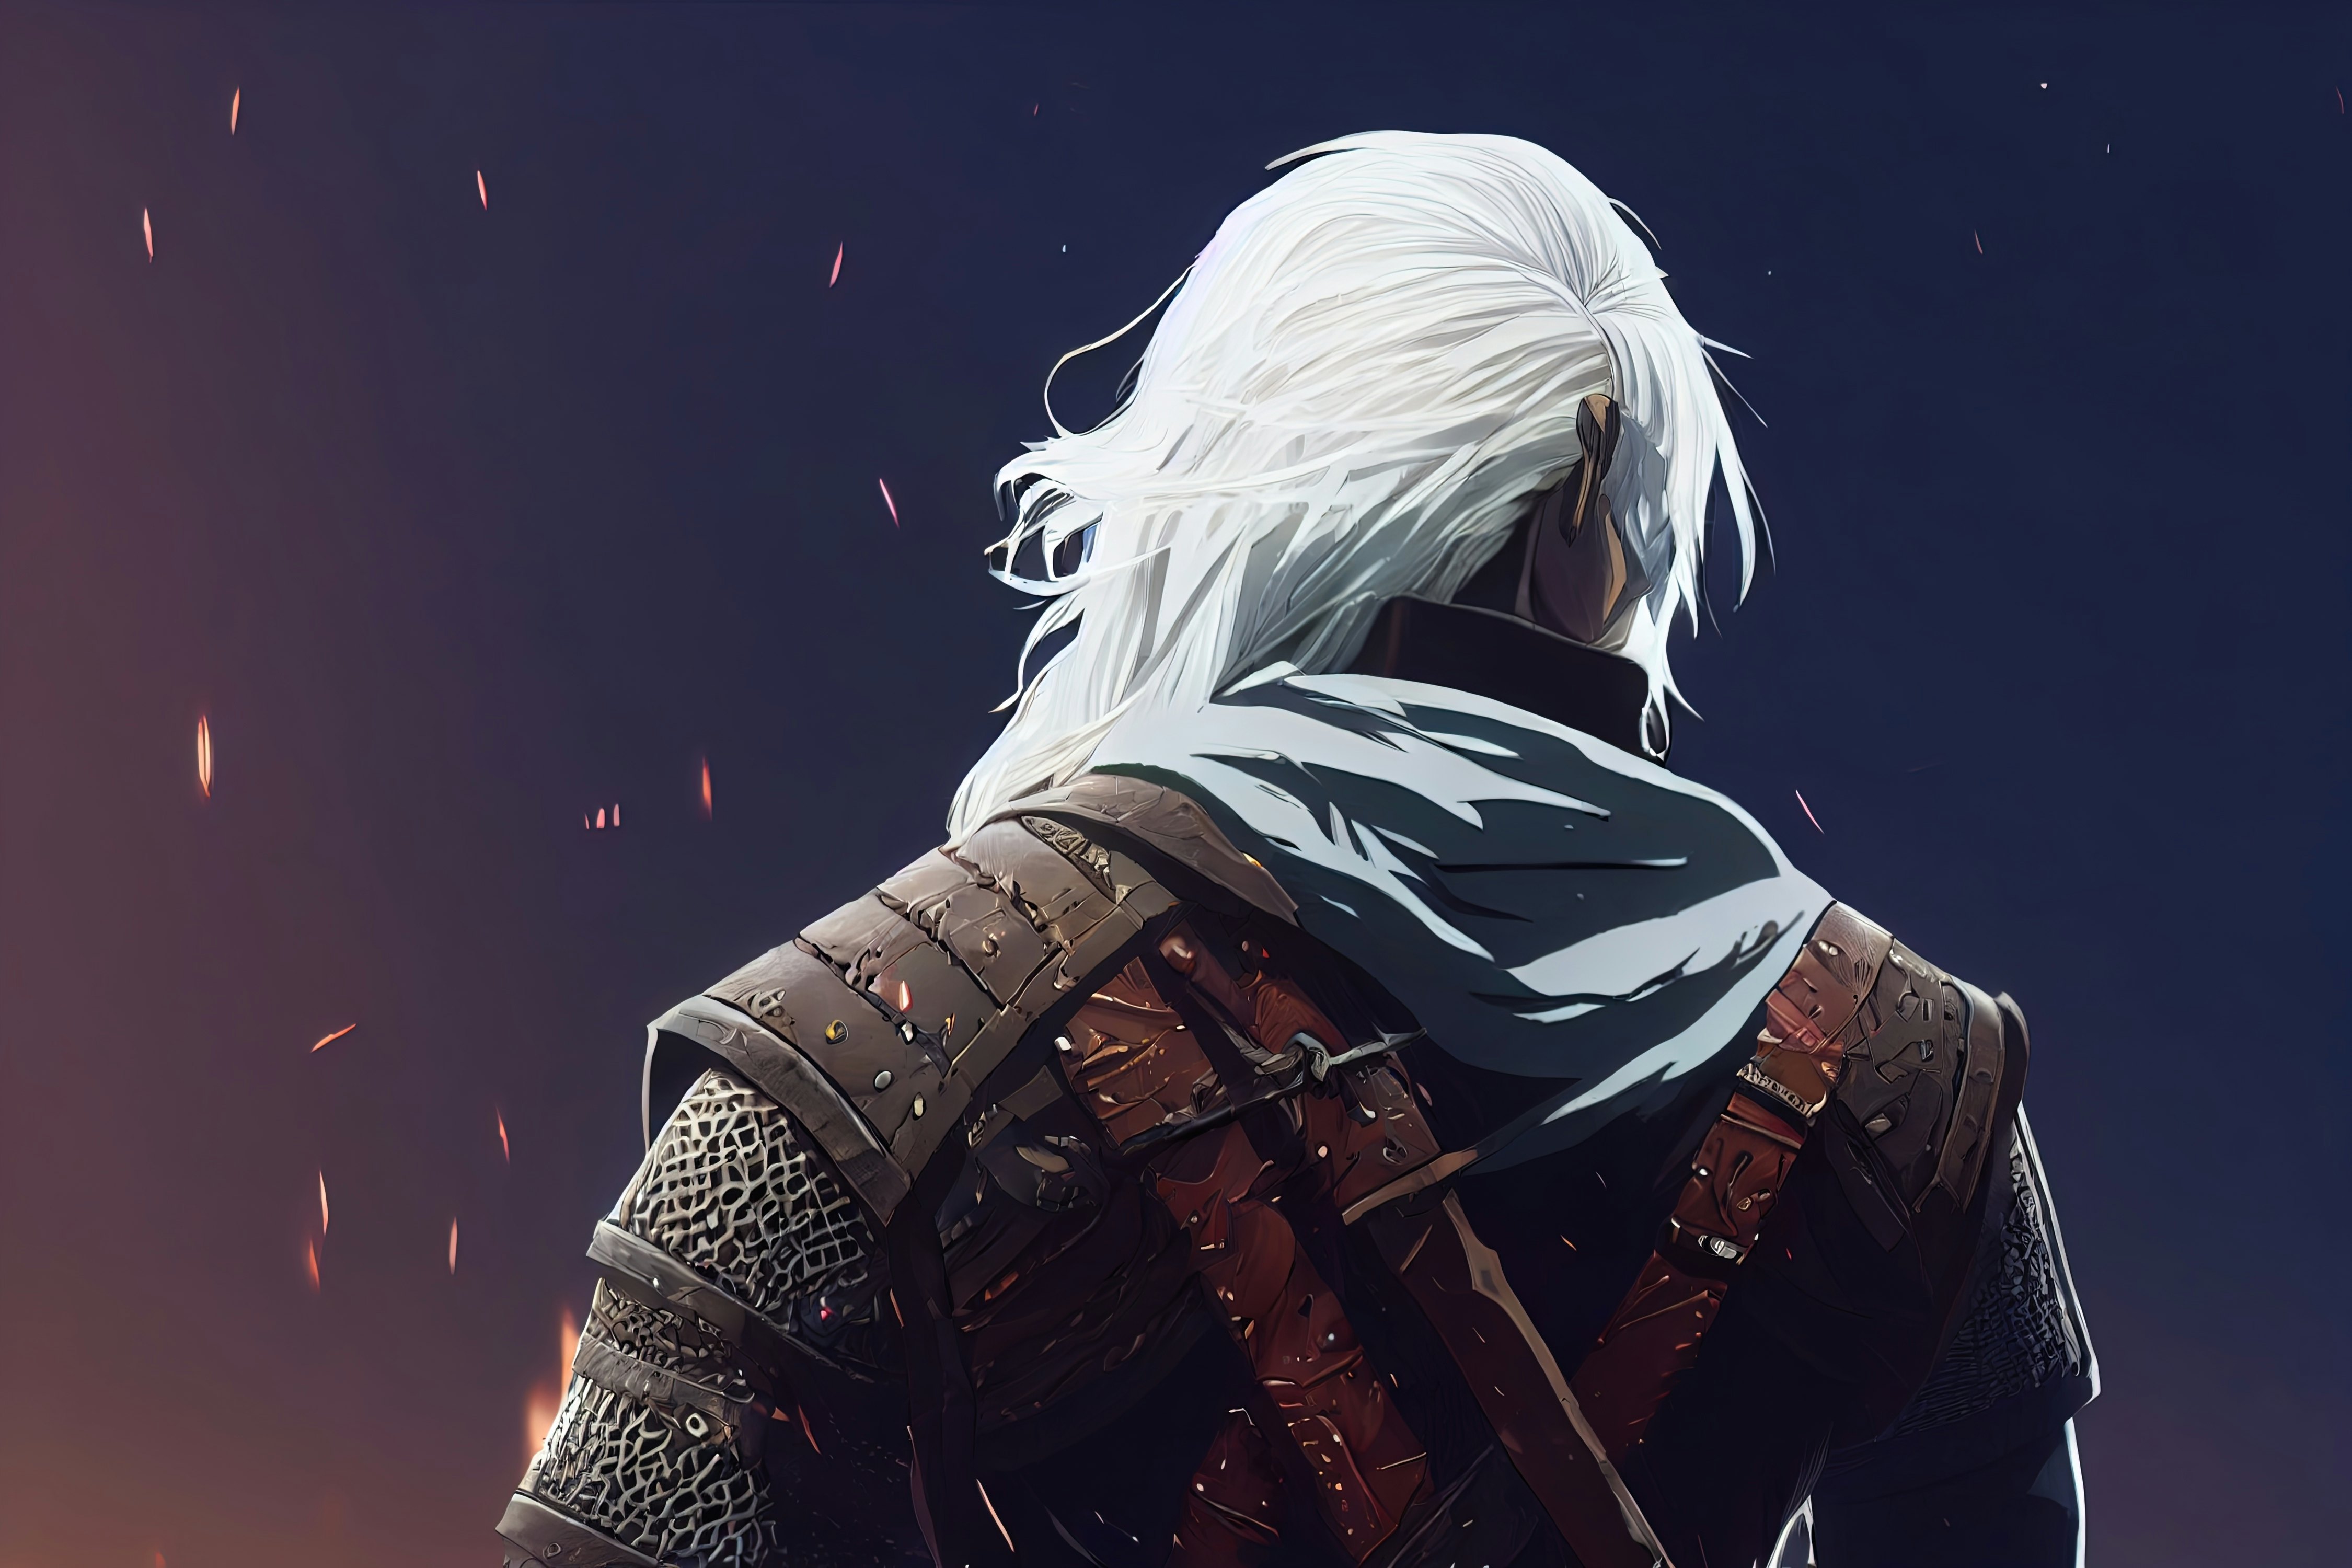 The Witcher 3 PS5 Update Release Date Finally Confirmed for 2022